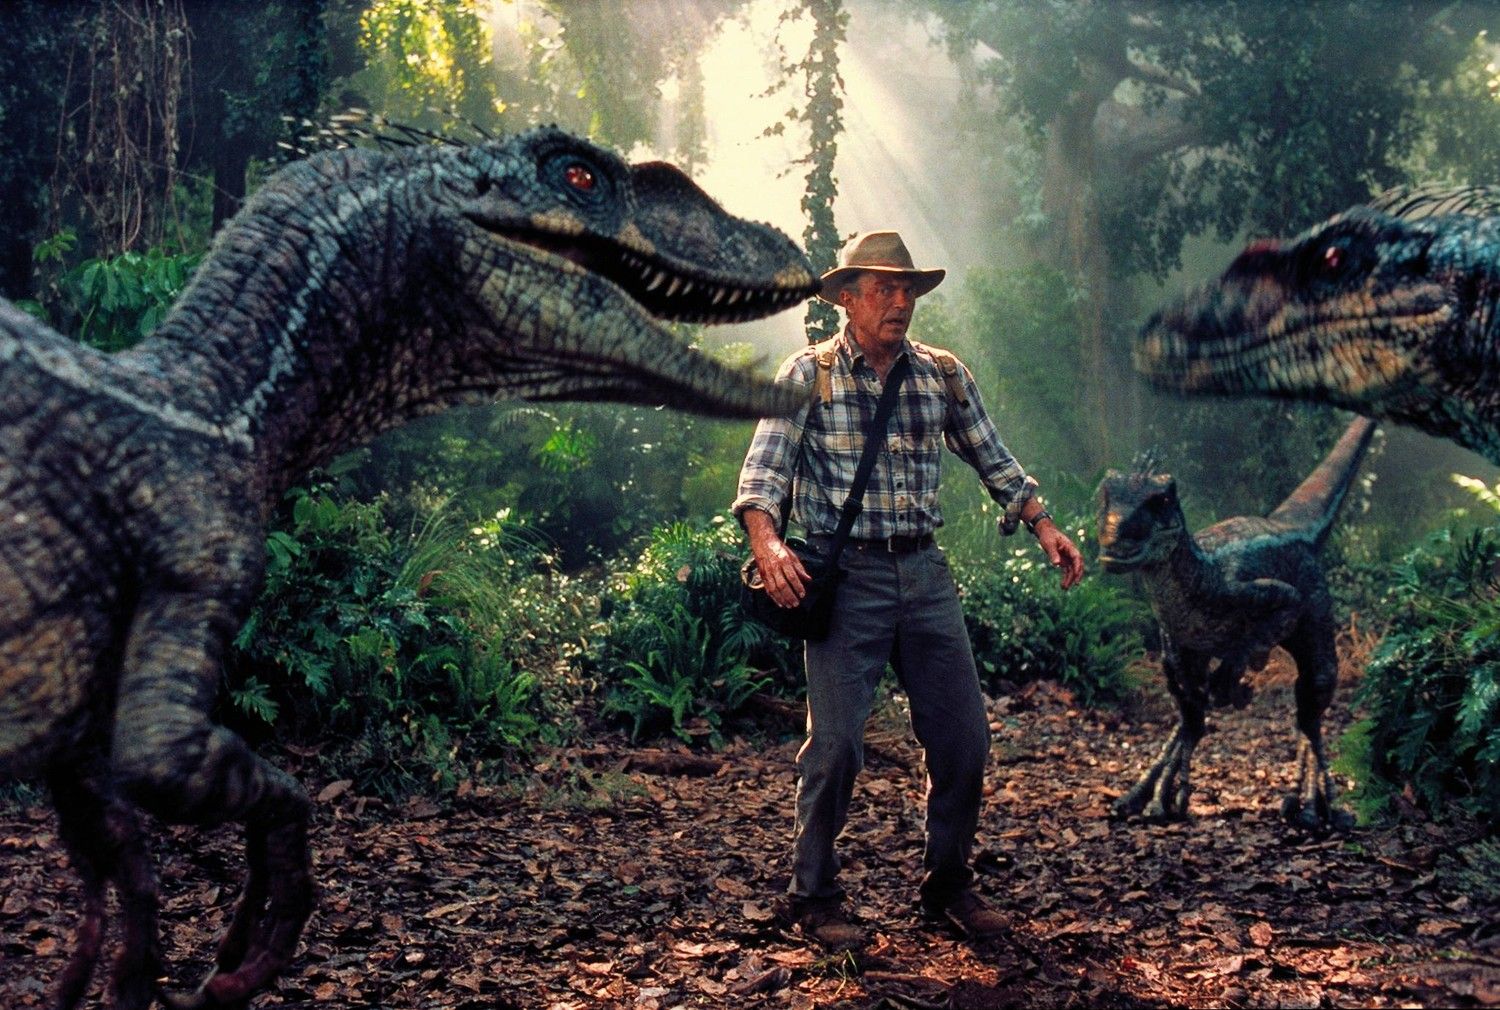 Jurassic Park 3 Revisited: \u0026quot;This Is How You Make Dinosaurs?\u0026quot;  Collider